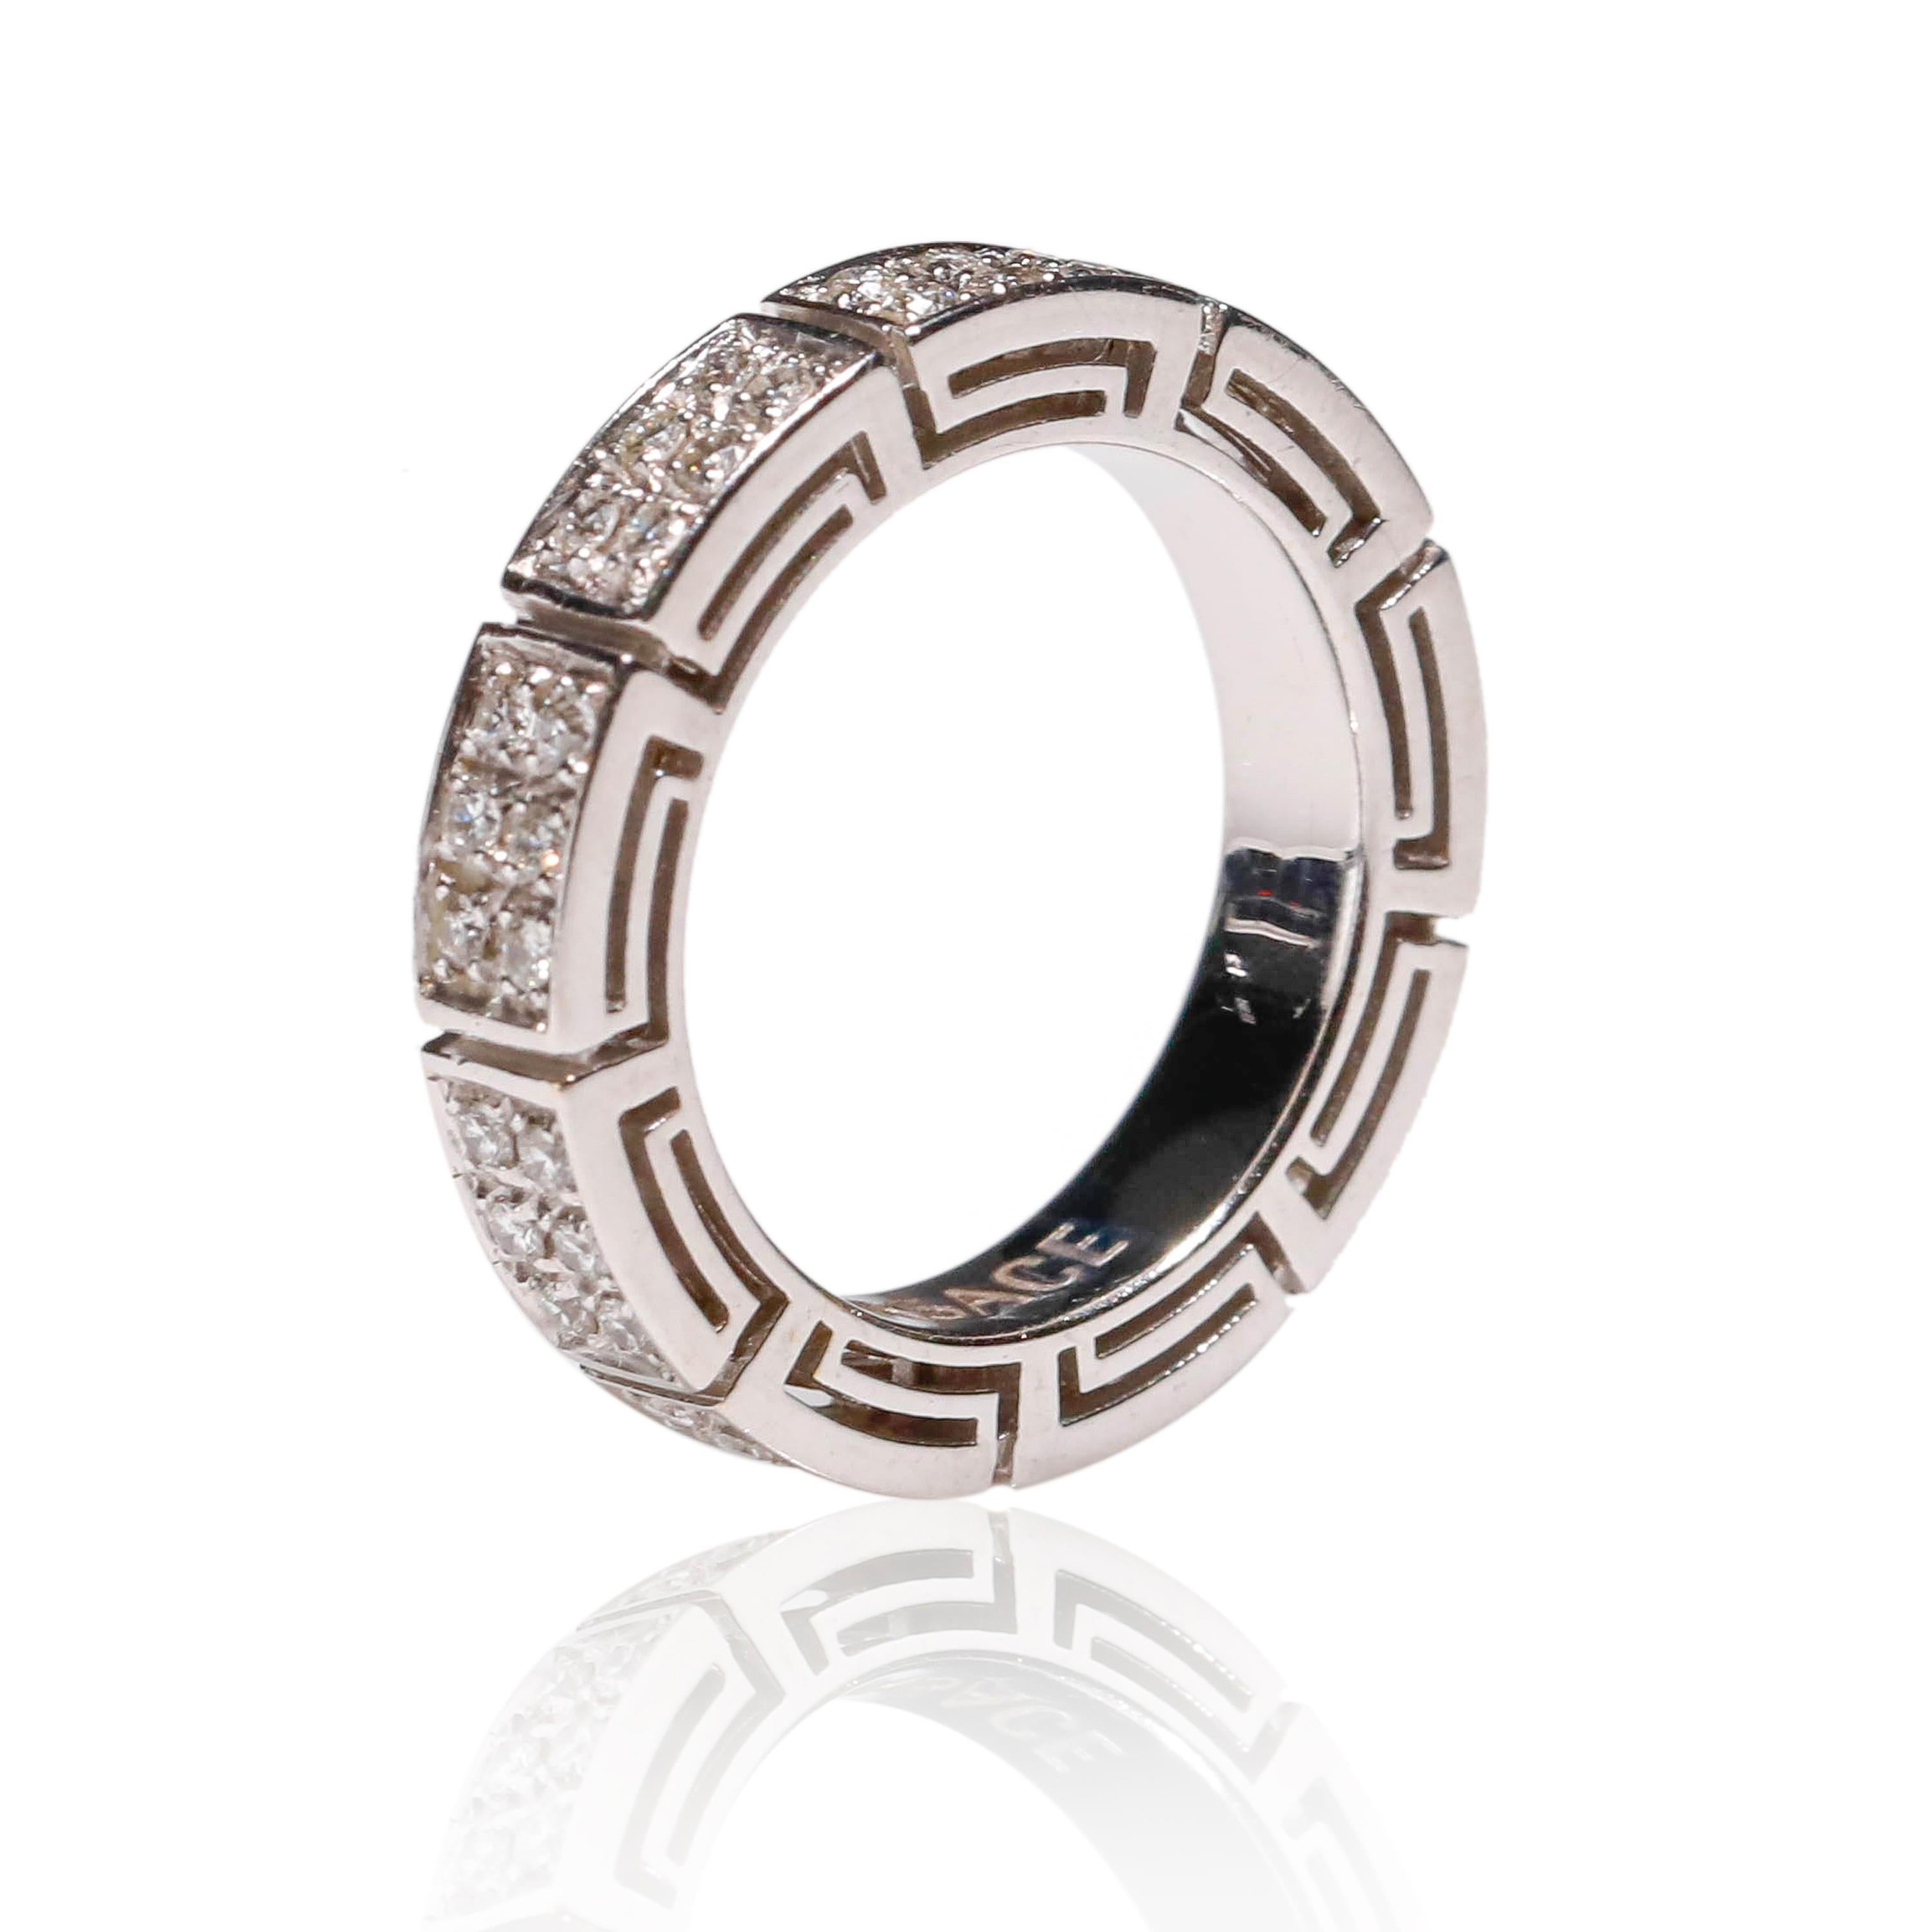 Versace 18 Karat White Gold 1.0 Carat Round Diamond Full Eternity Band Ring

Crafted in 18 kt White Gold, this Unique design showcases a white Diamond 1 TCW Round Cut diamond, set in a solid White Gold, Polished to a brilliant shine.

Gold Purity: